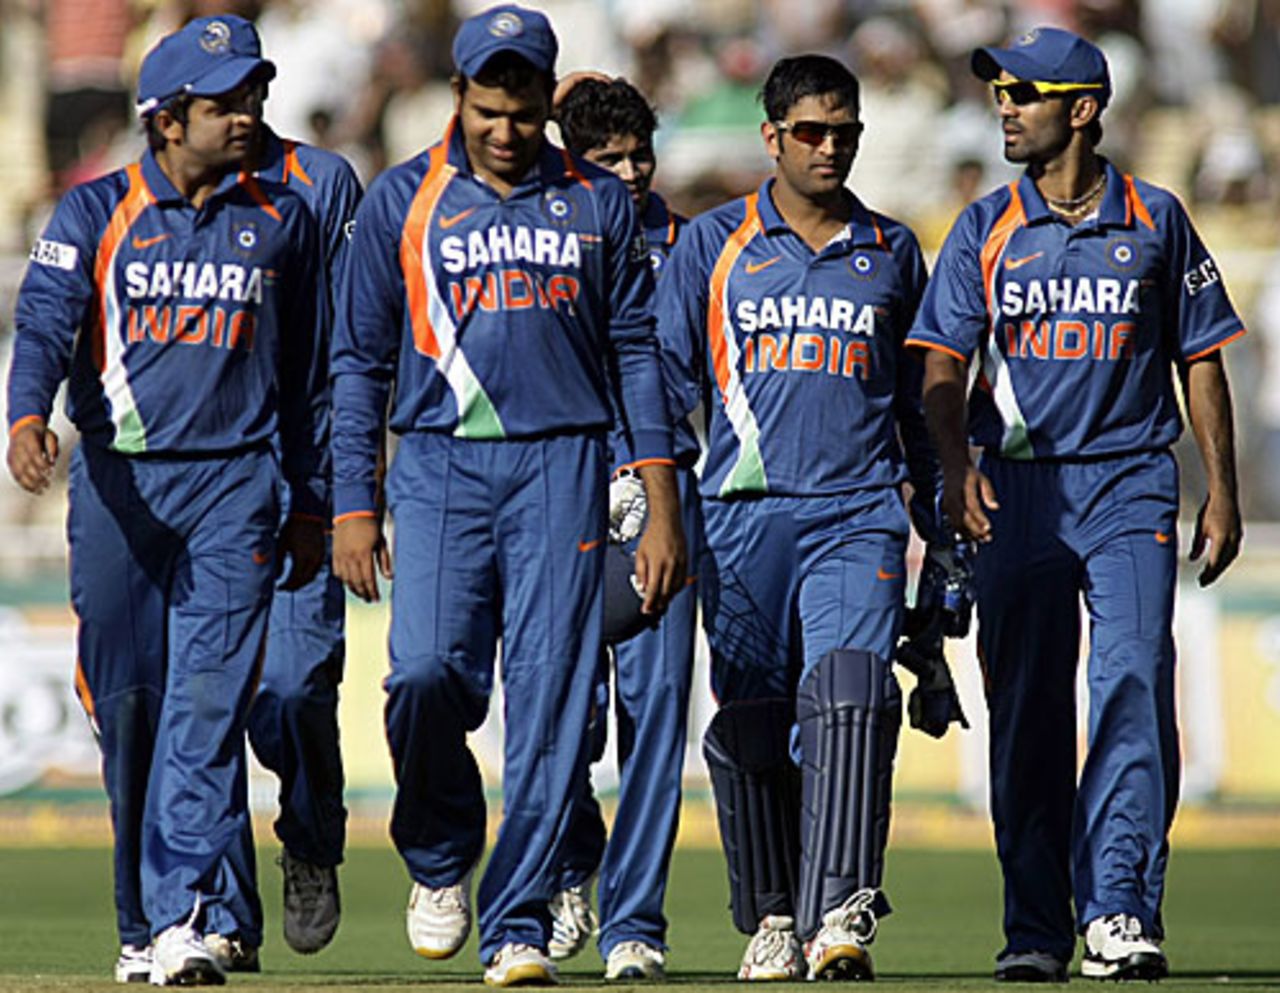 The Indians get together for a drinks break, India v South Africa, 3rd ODI, Ahmedabad, February 27, 2010